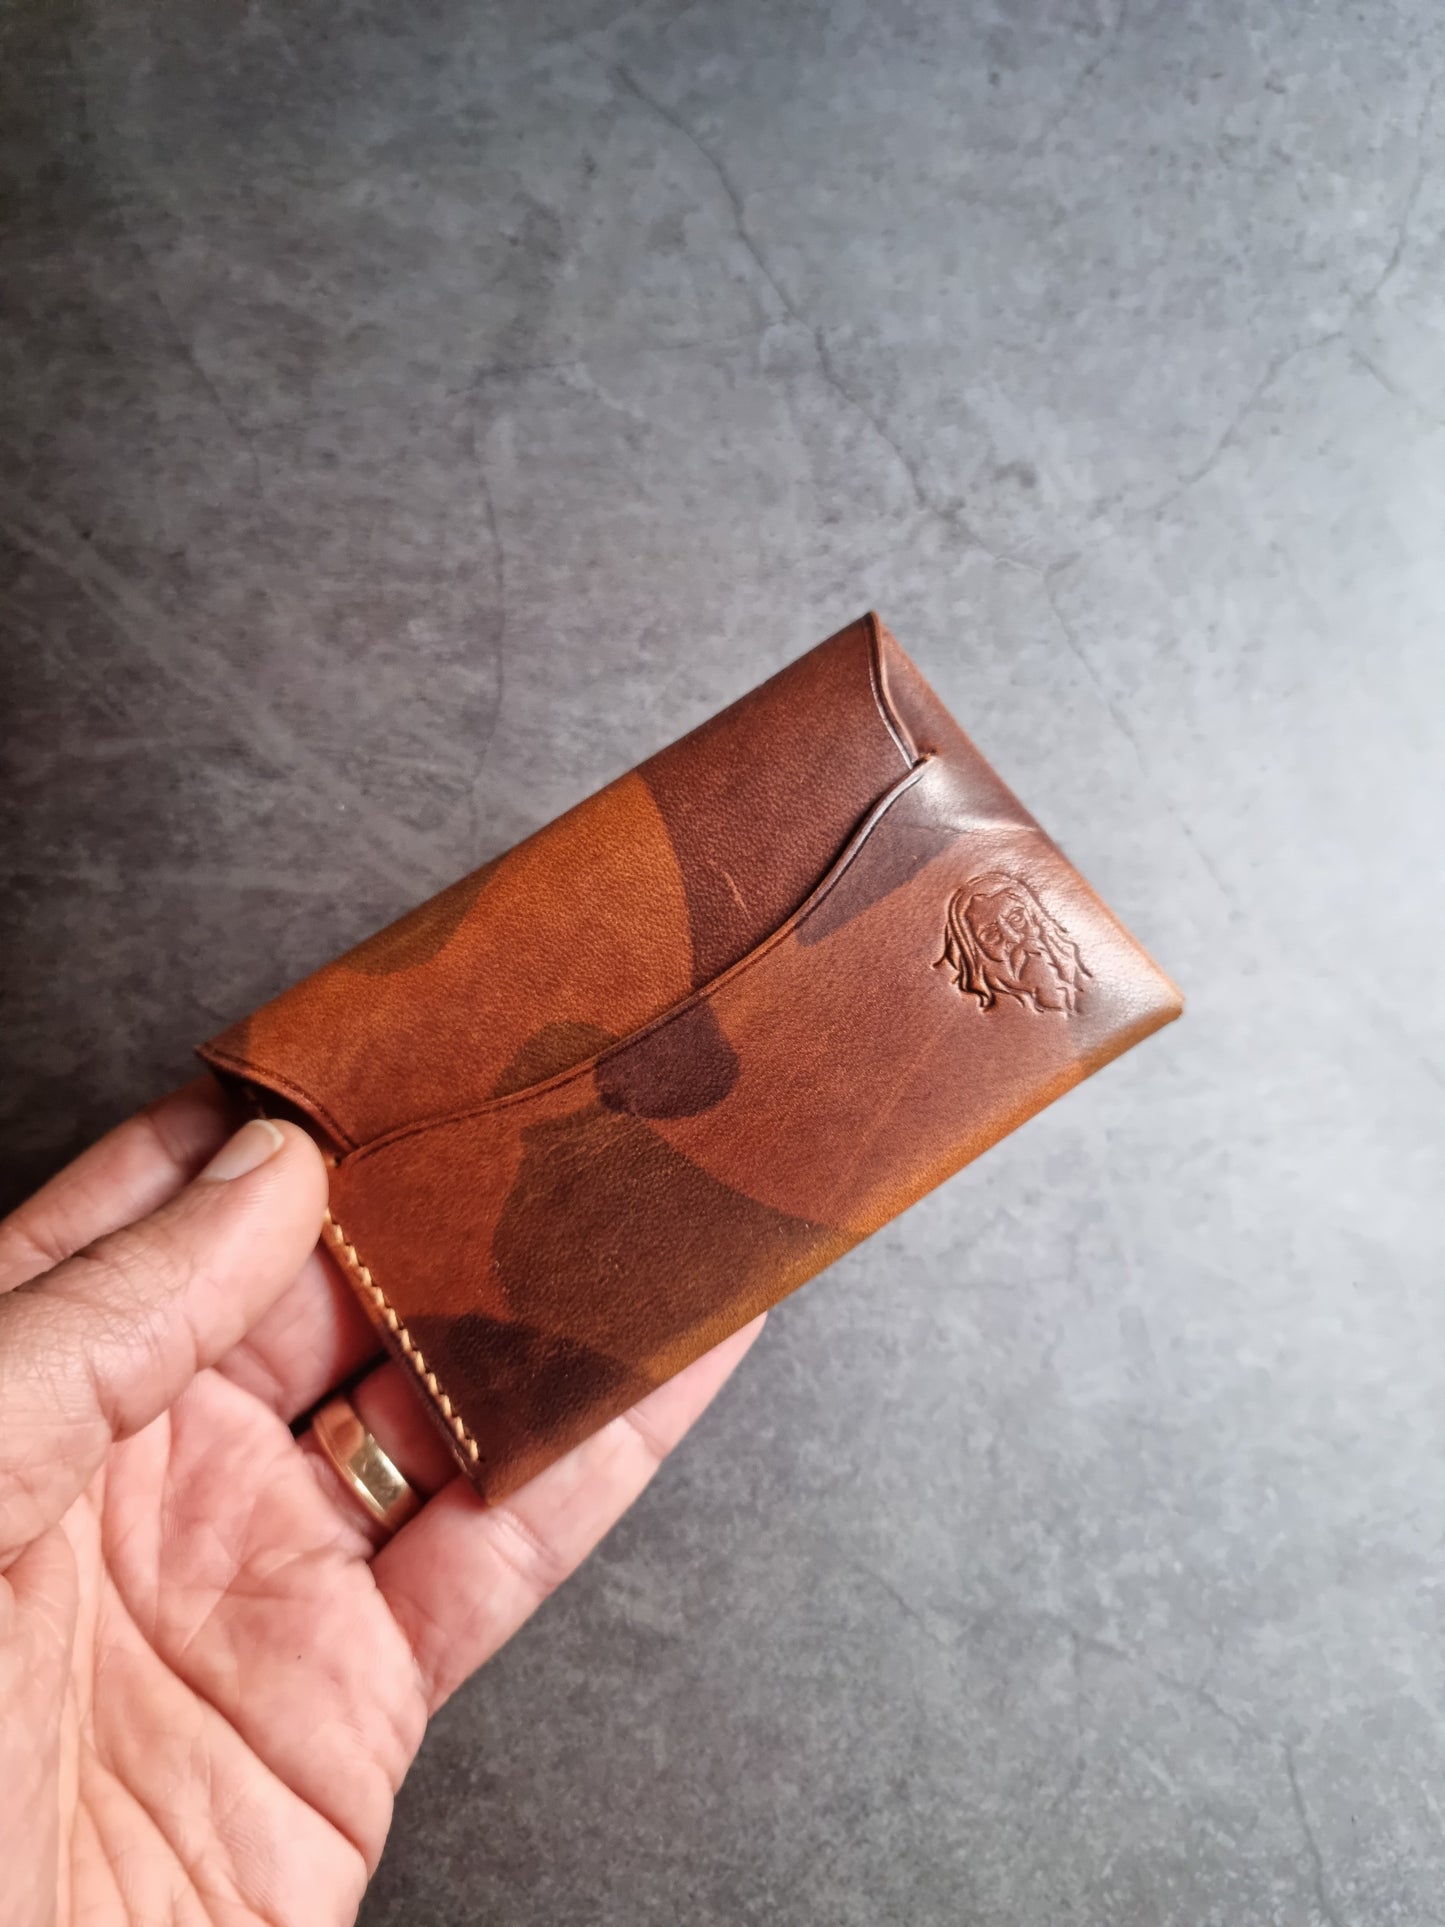 Henry mini wallet - all in one minimalistic design